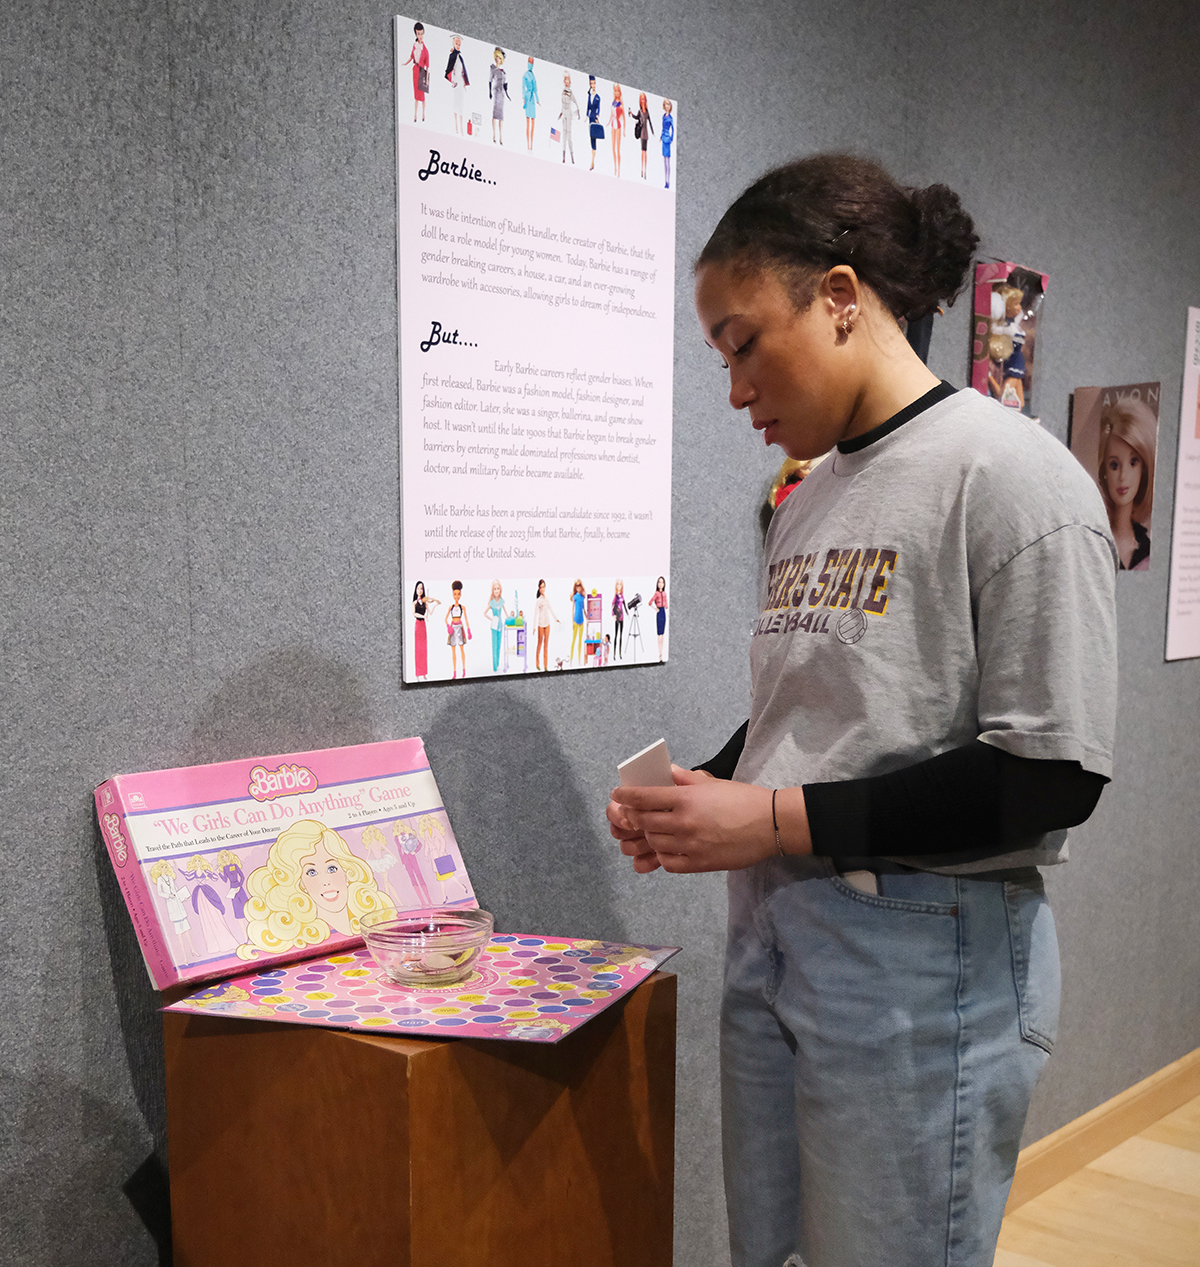 Ferris State University’s Fine Art Gallery is hosting a new exhibit, “Much Ado About Barbie,” is free and open to the public Tuesdays through Fridays through Feb. 28.